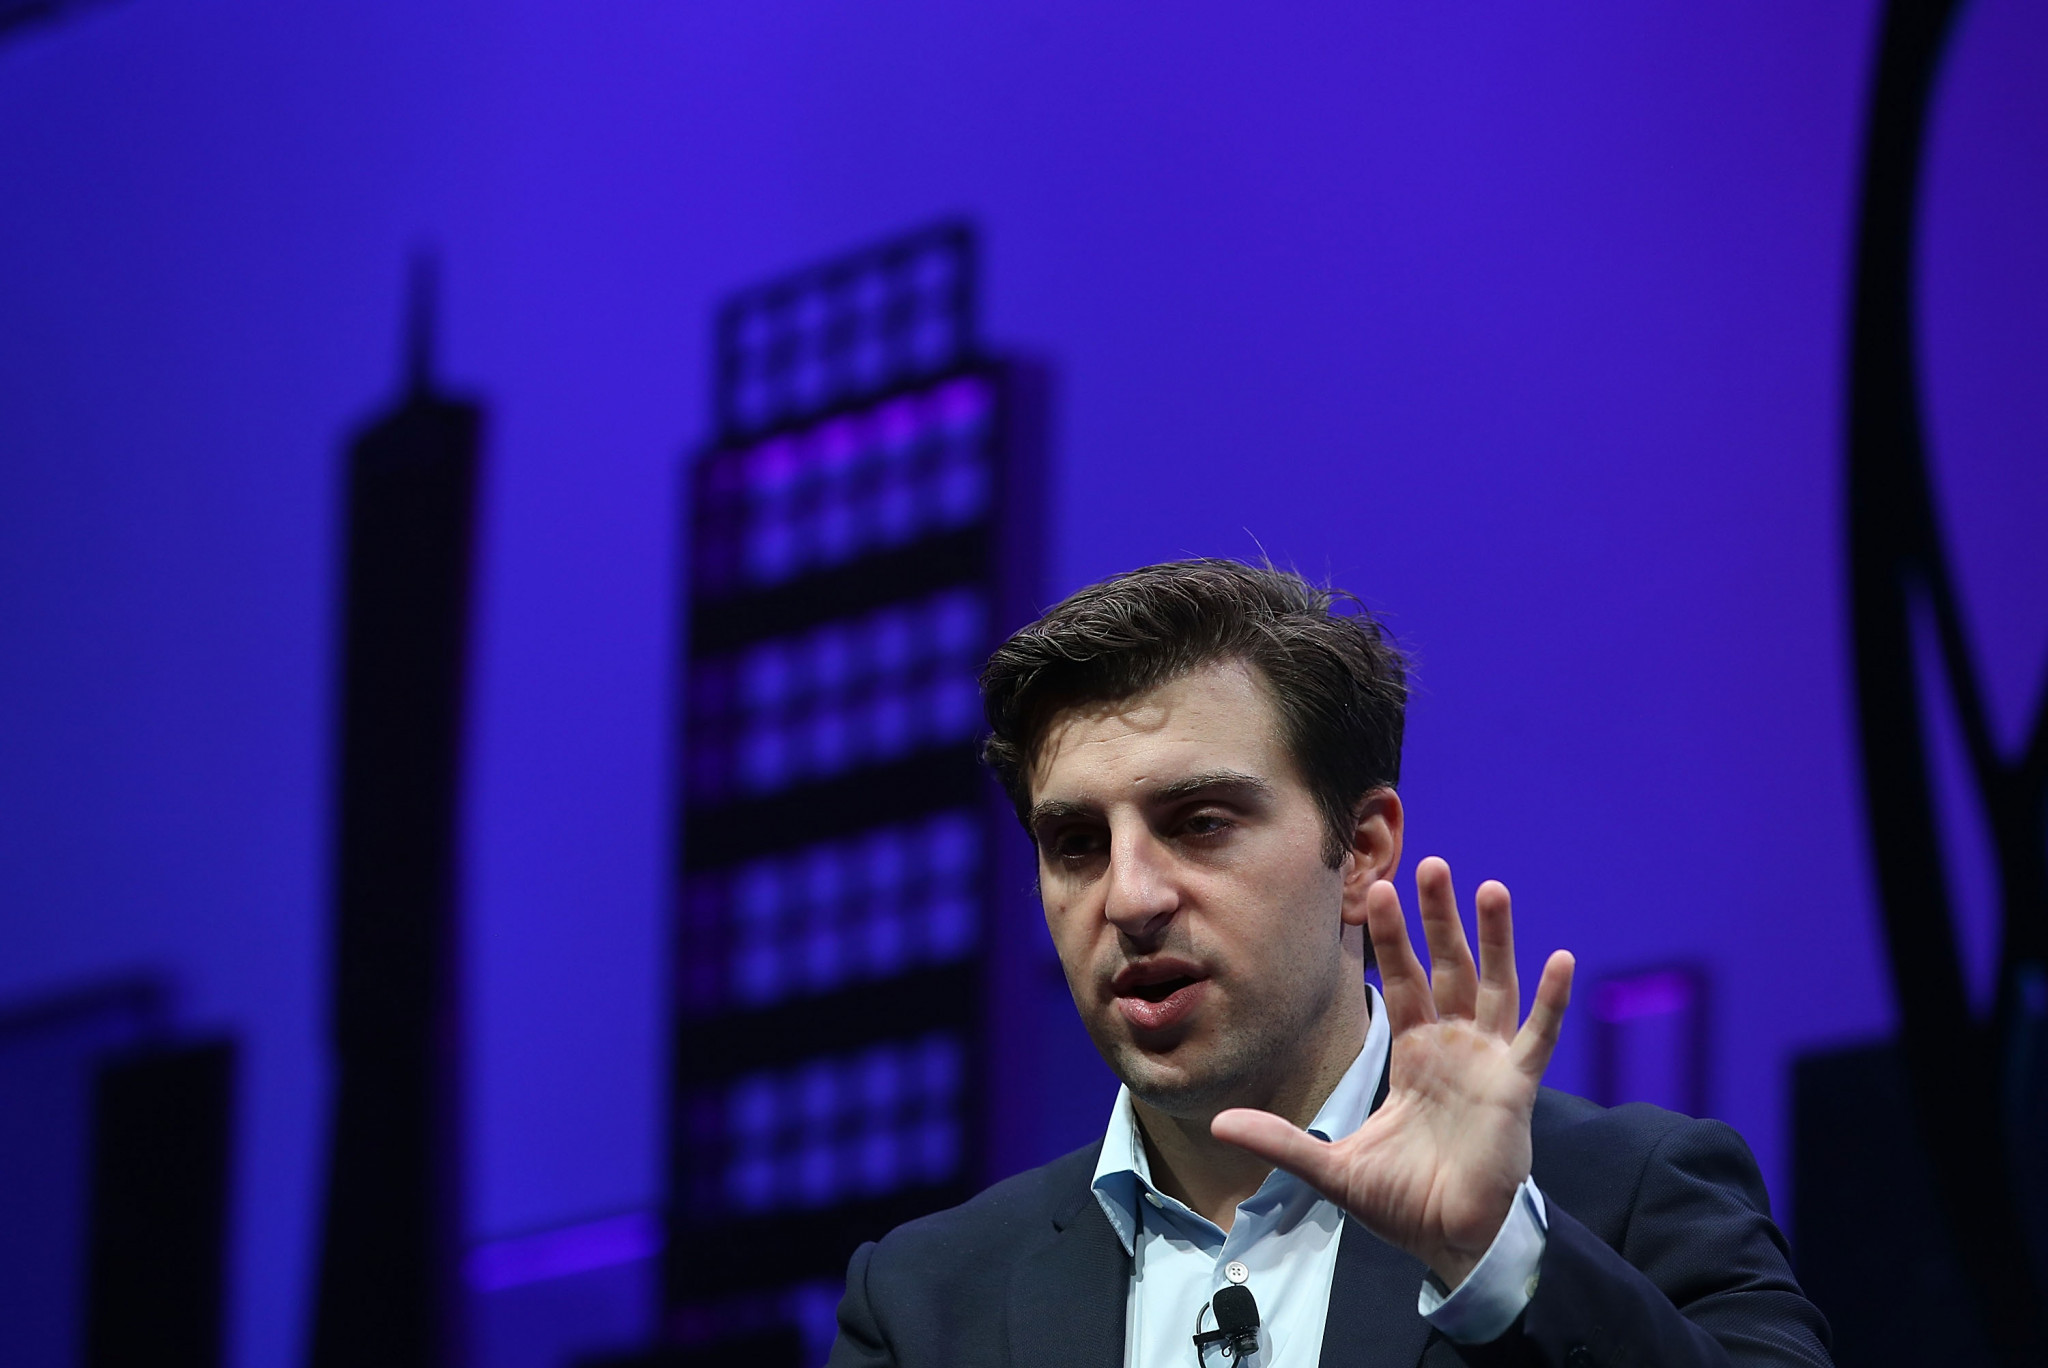 Airbnb co-founder Brian Chesky retained confidence in the company bouncing back, even during the most difficult days during the coronavirus pandemic  ©Getty Images